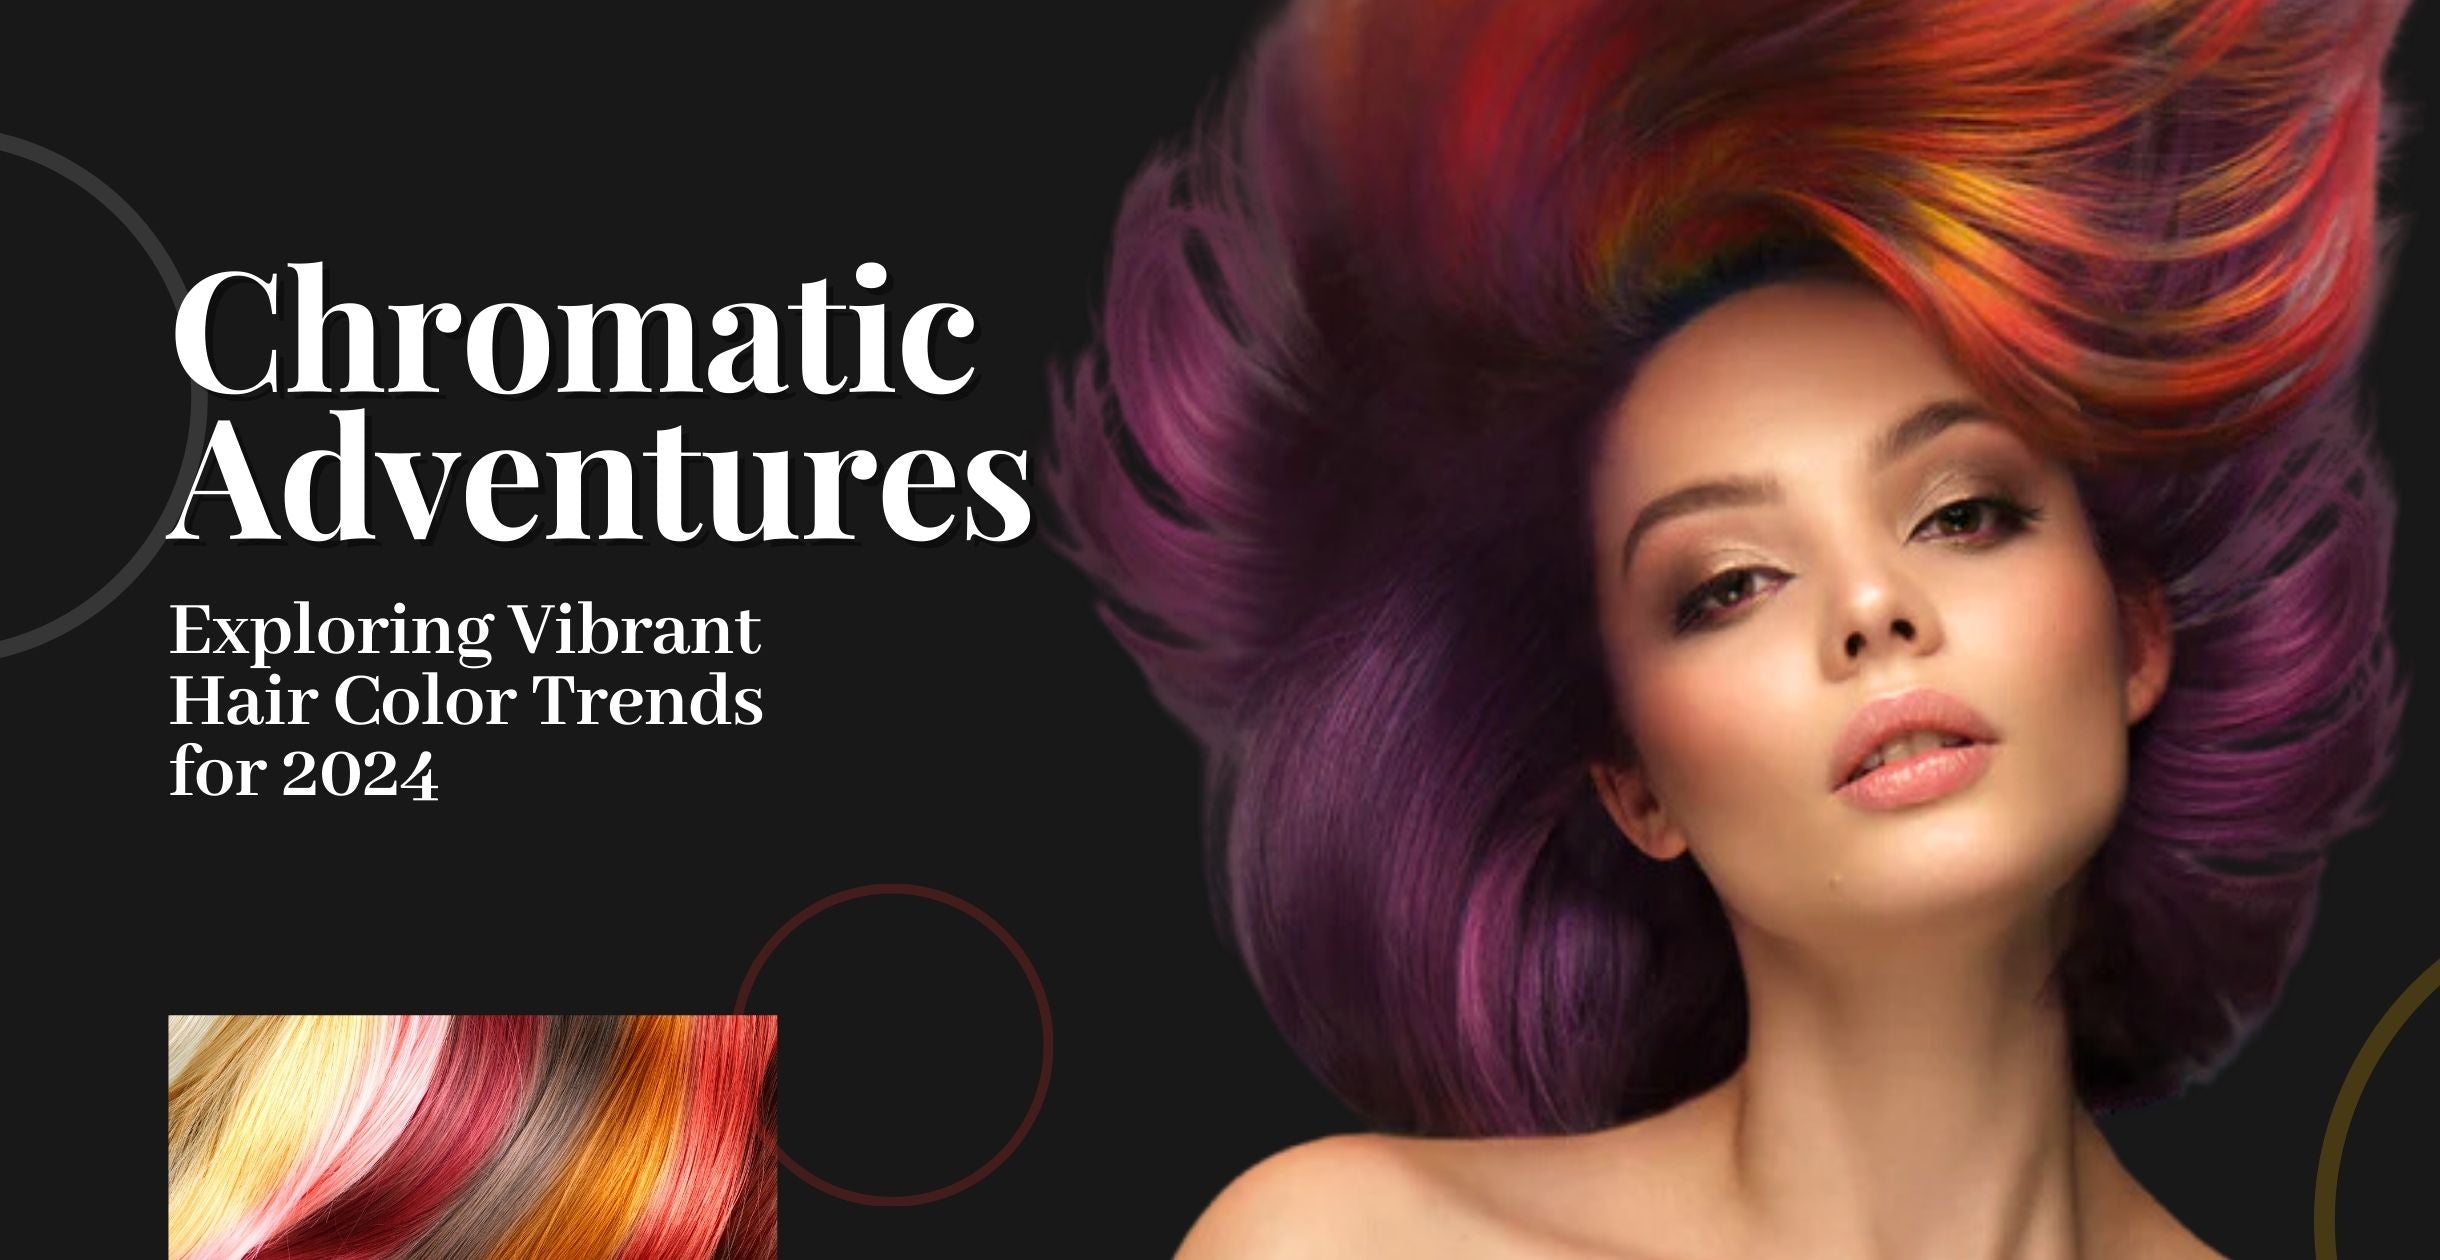 Chromatic Adventures: Exploring Vibrant Hair Color Trends for 2024